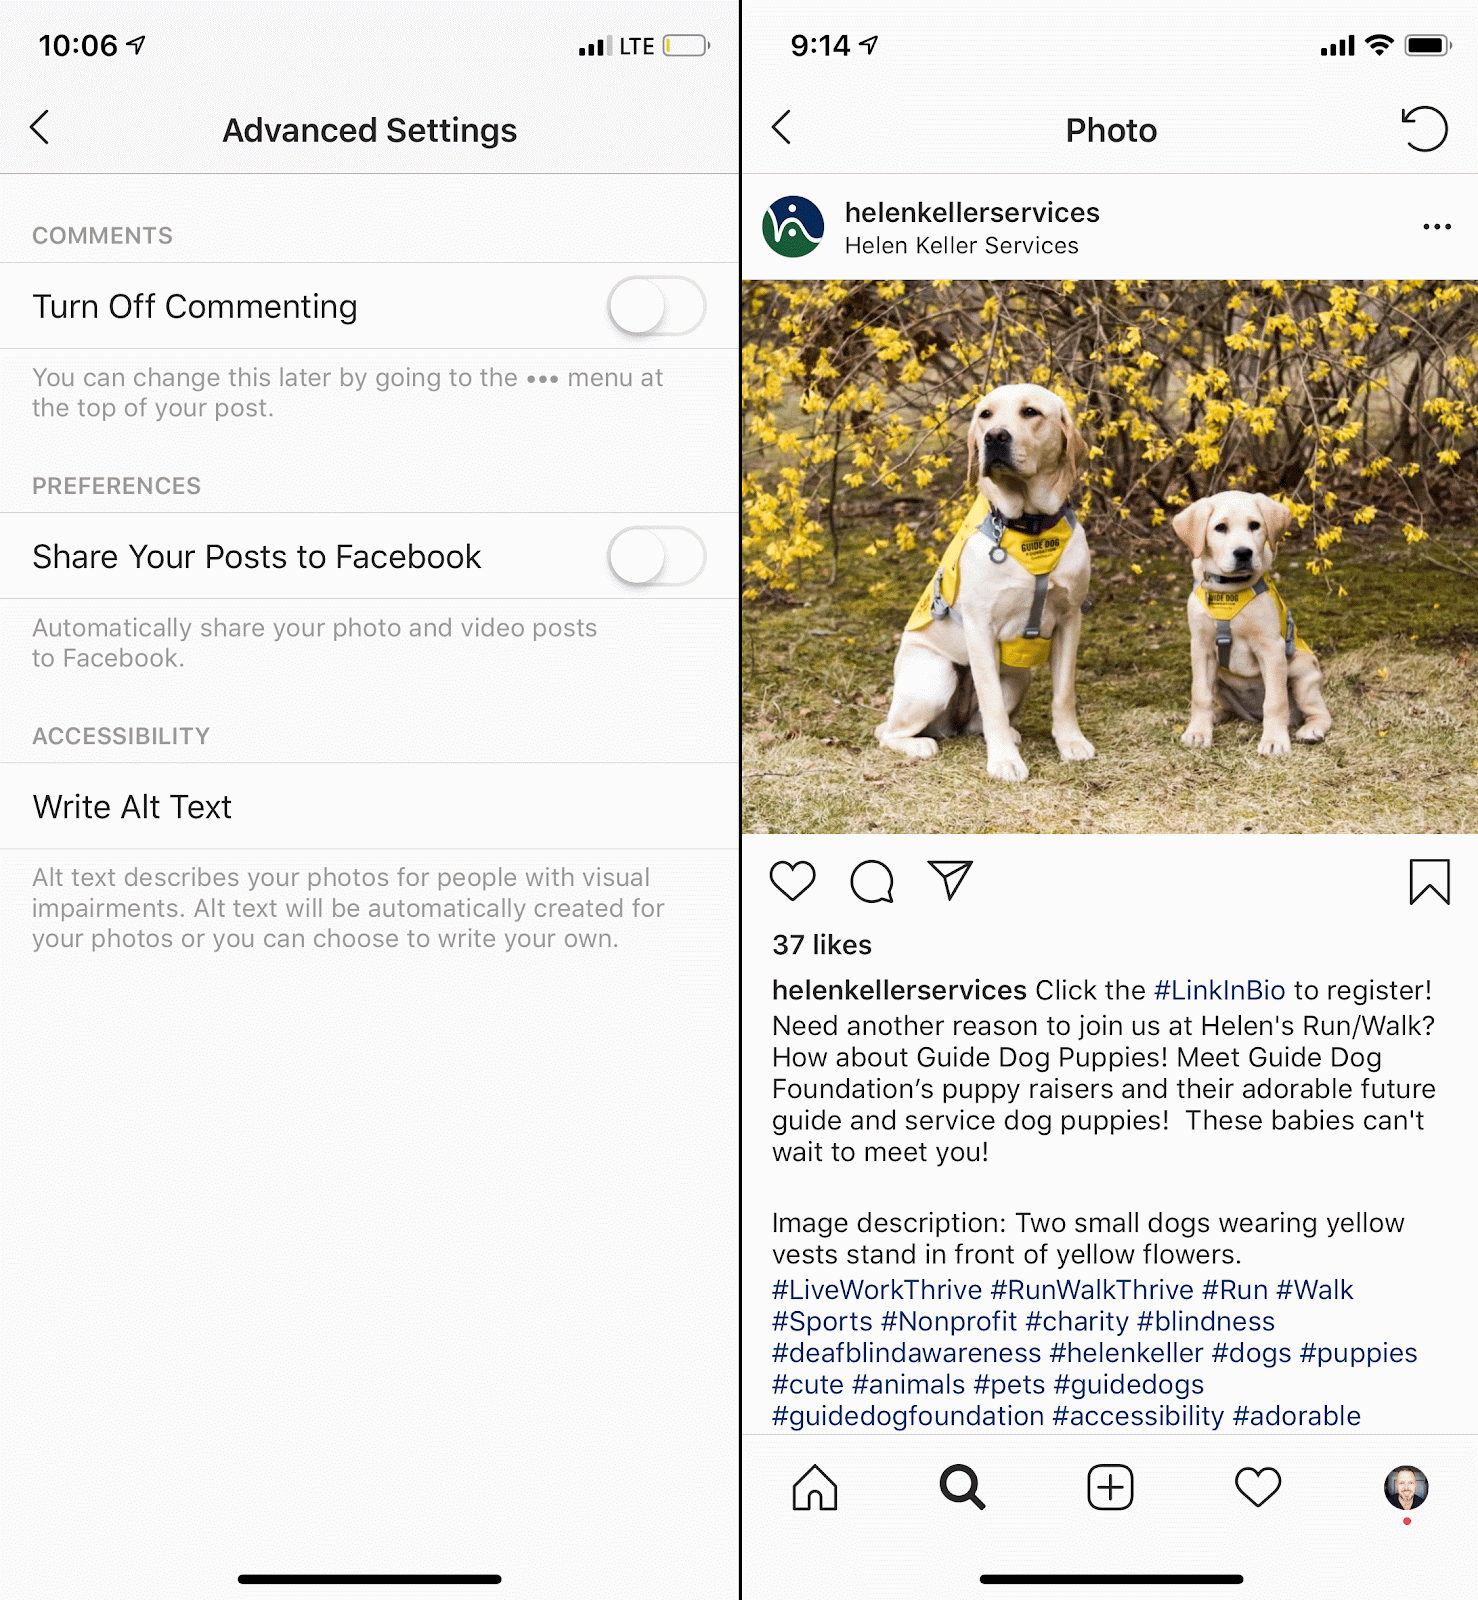 Two mobile phone screenshots are shown in this image. The first shows the Instagram Advanced Settings screen where image descriptions can be provided. The second screenshot shows an Instagram post from Hellen Keller International, as an example of how to share an Image Description in the copy of the image’s post. 